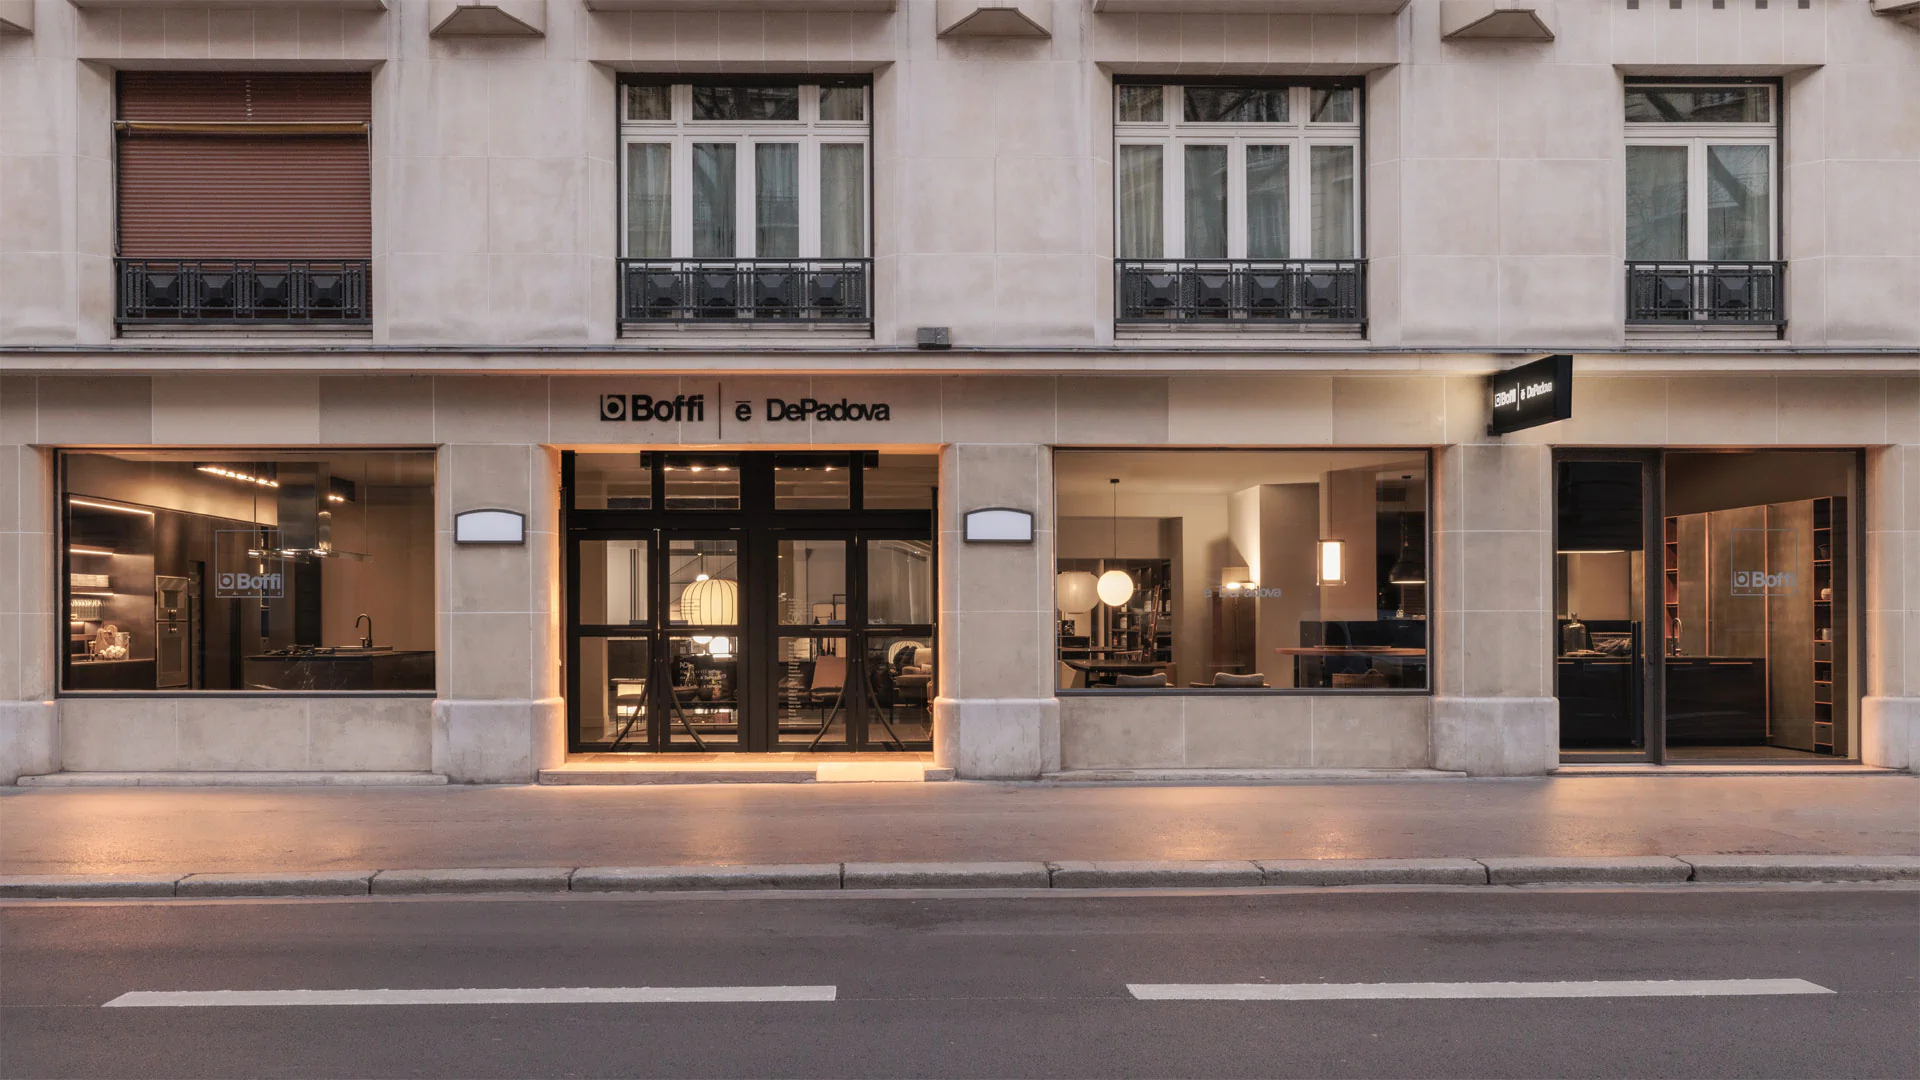 A new address in the heart of Paris